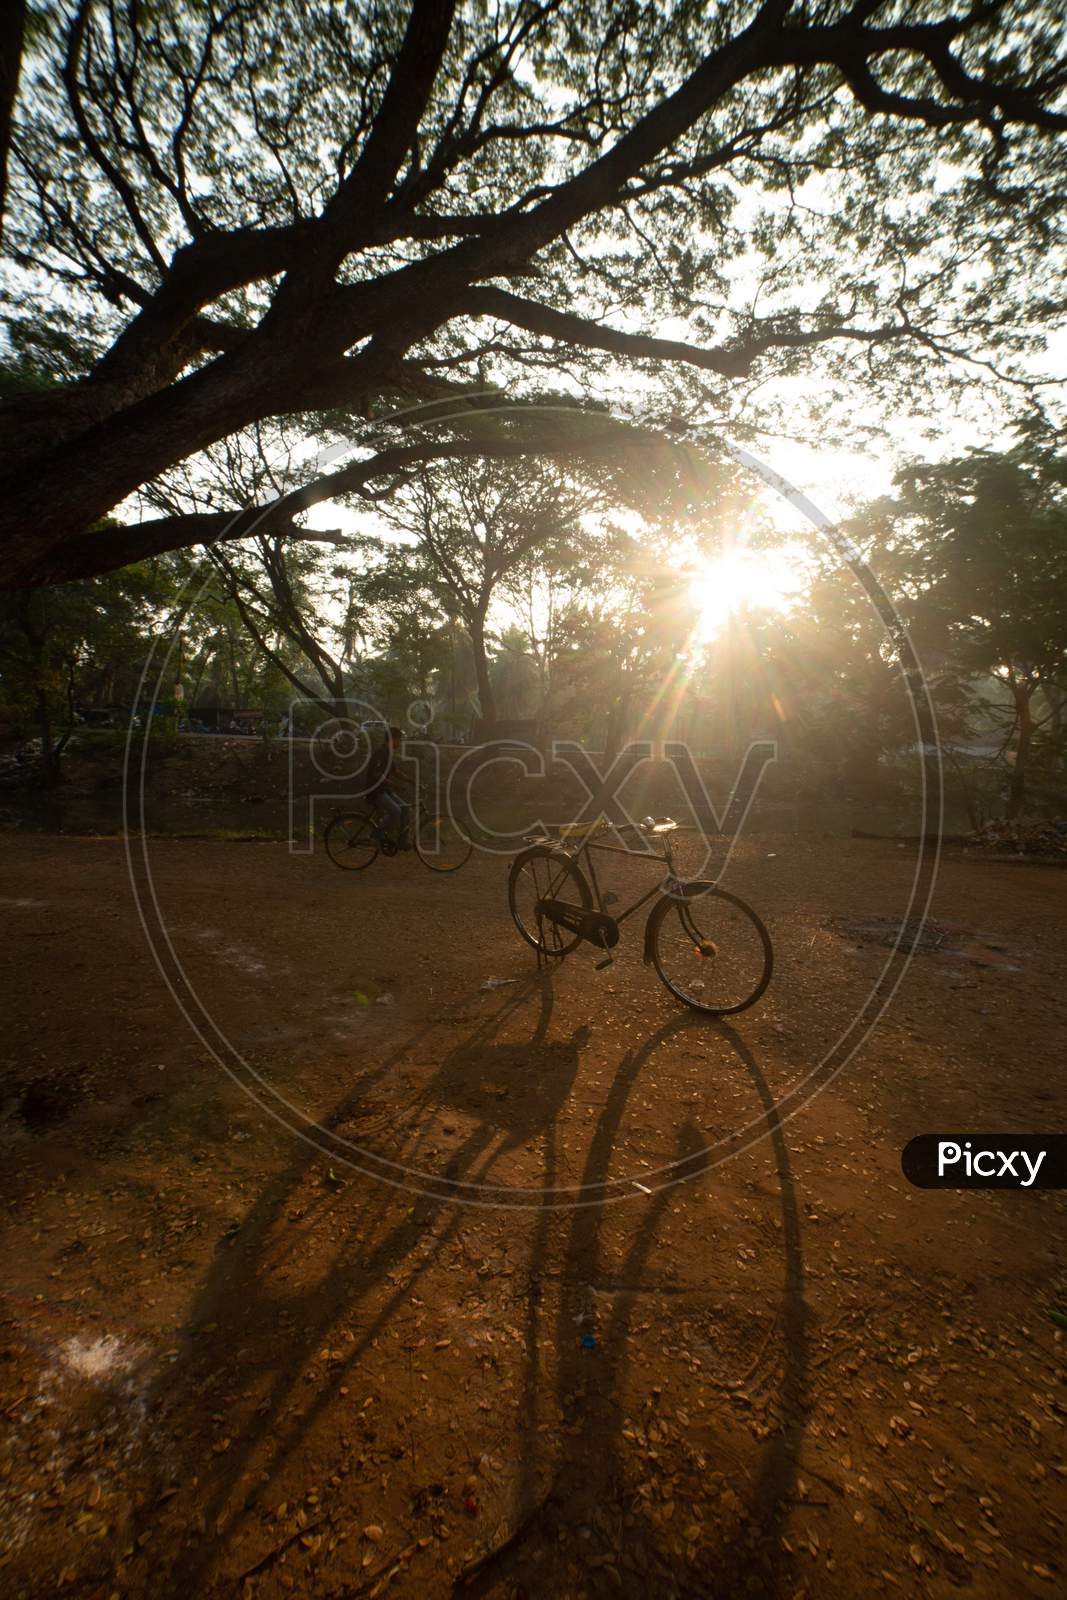 View of a bicycle and shadow